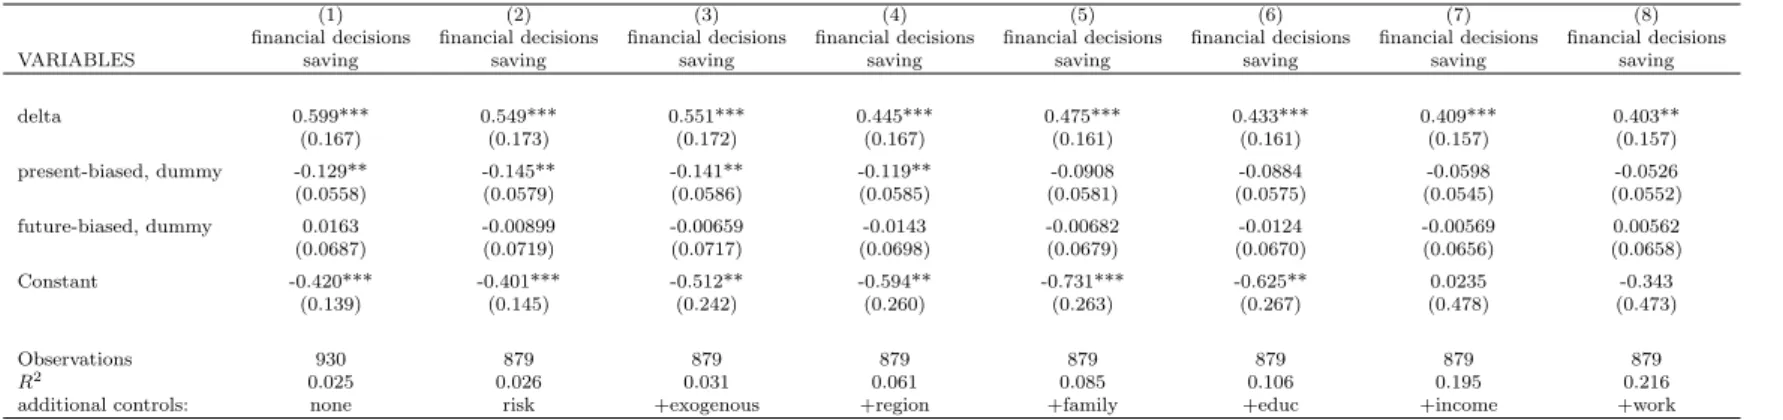 Table 8: The association of time preference with savings decisions, OLS